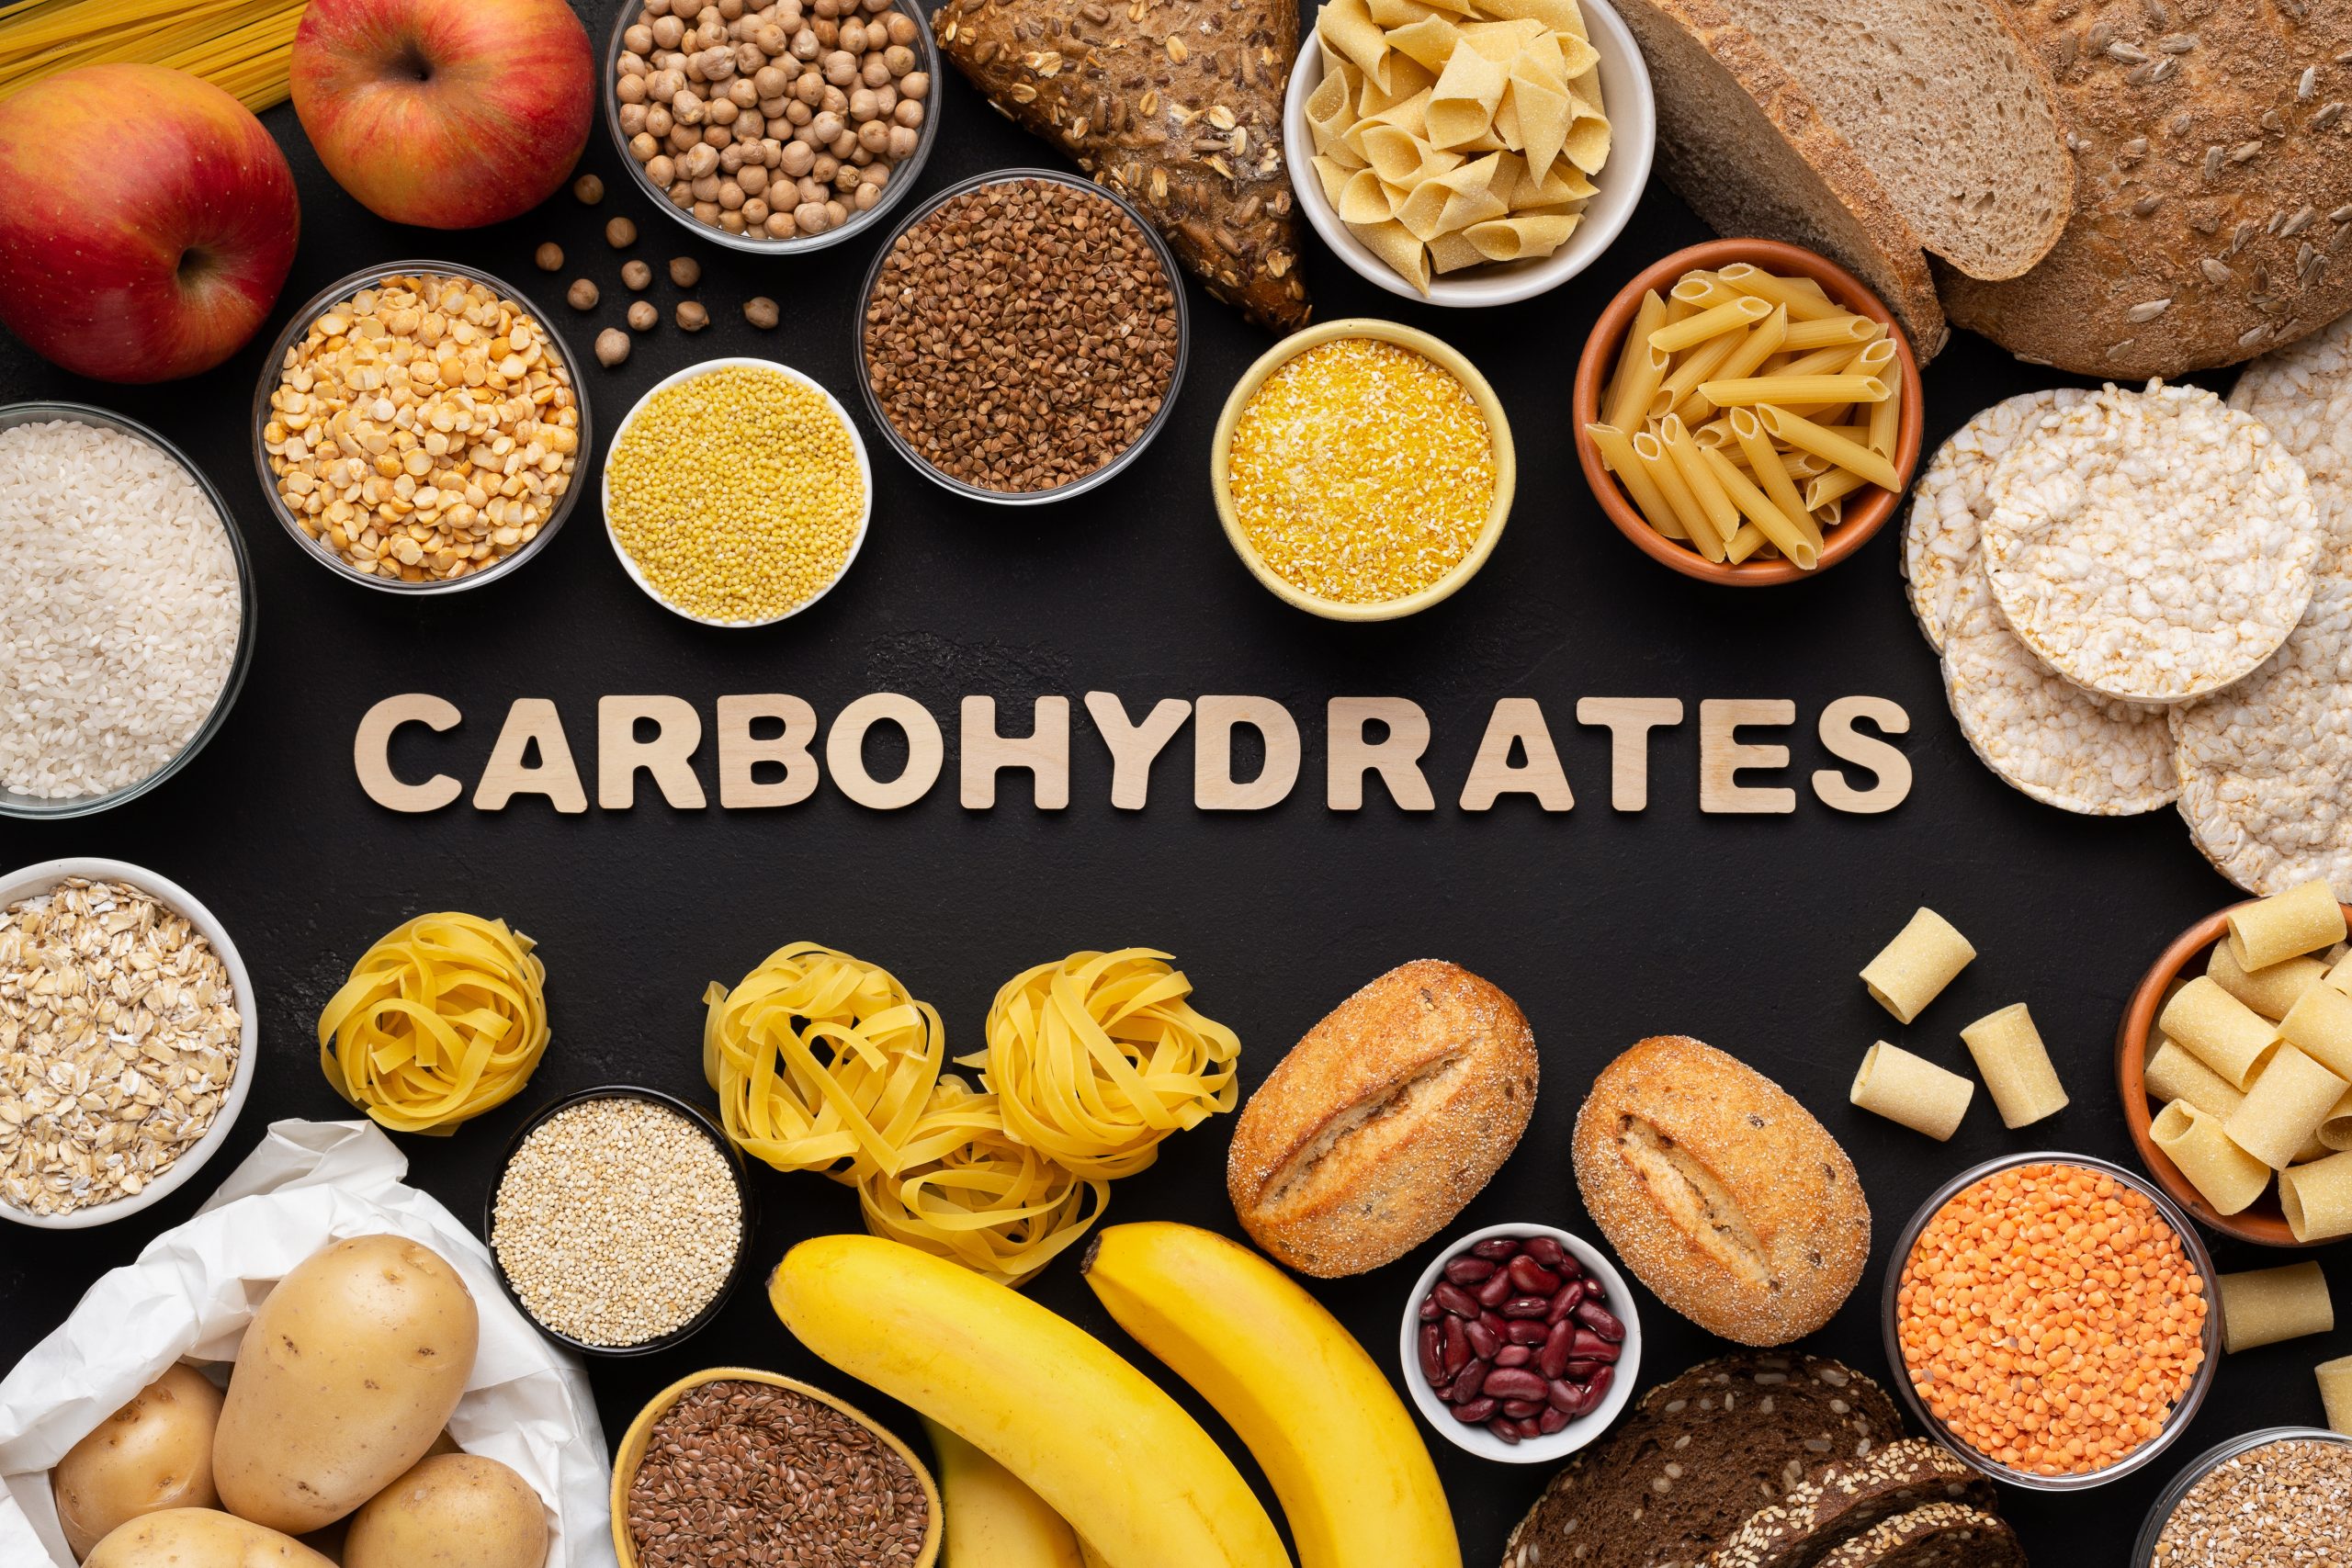 Carbohydrates: To Eat or Not to Eat